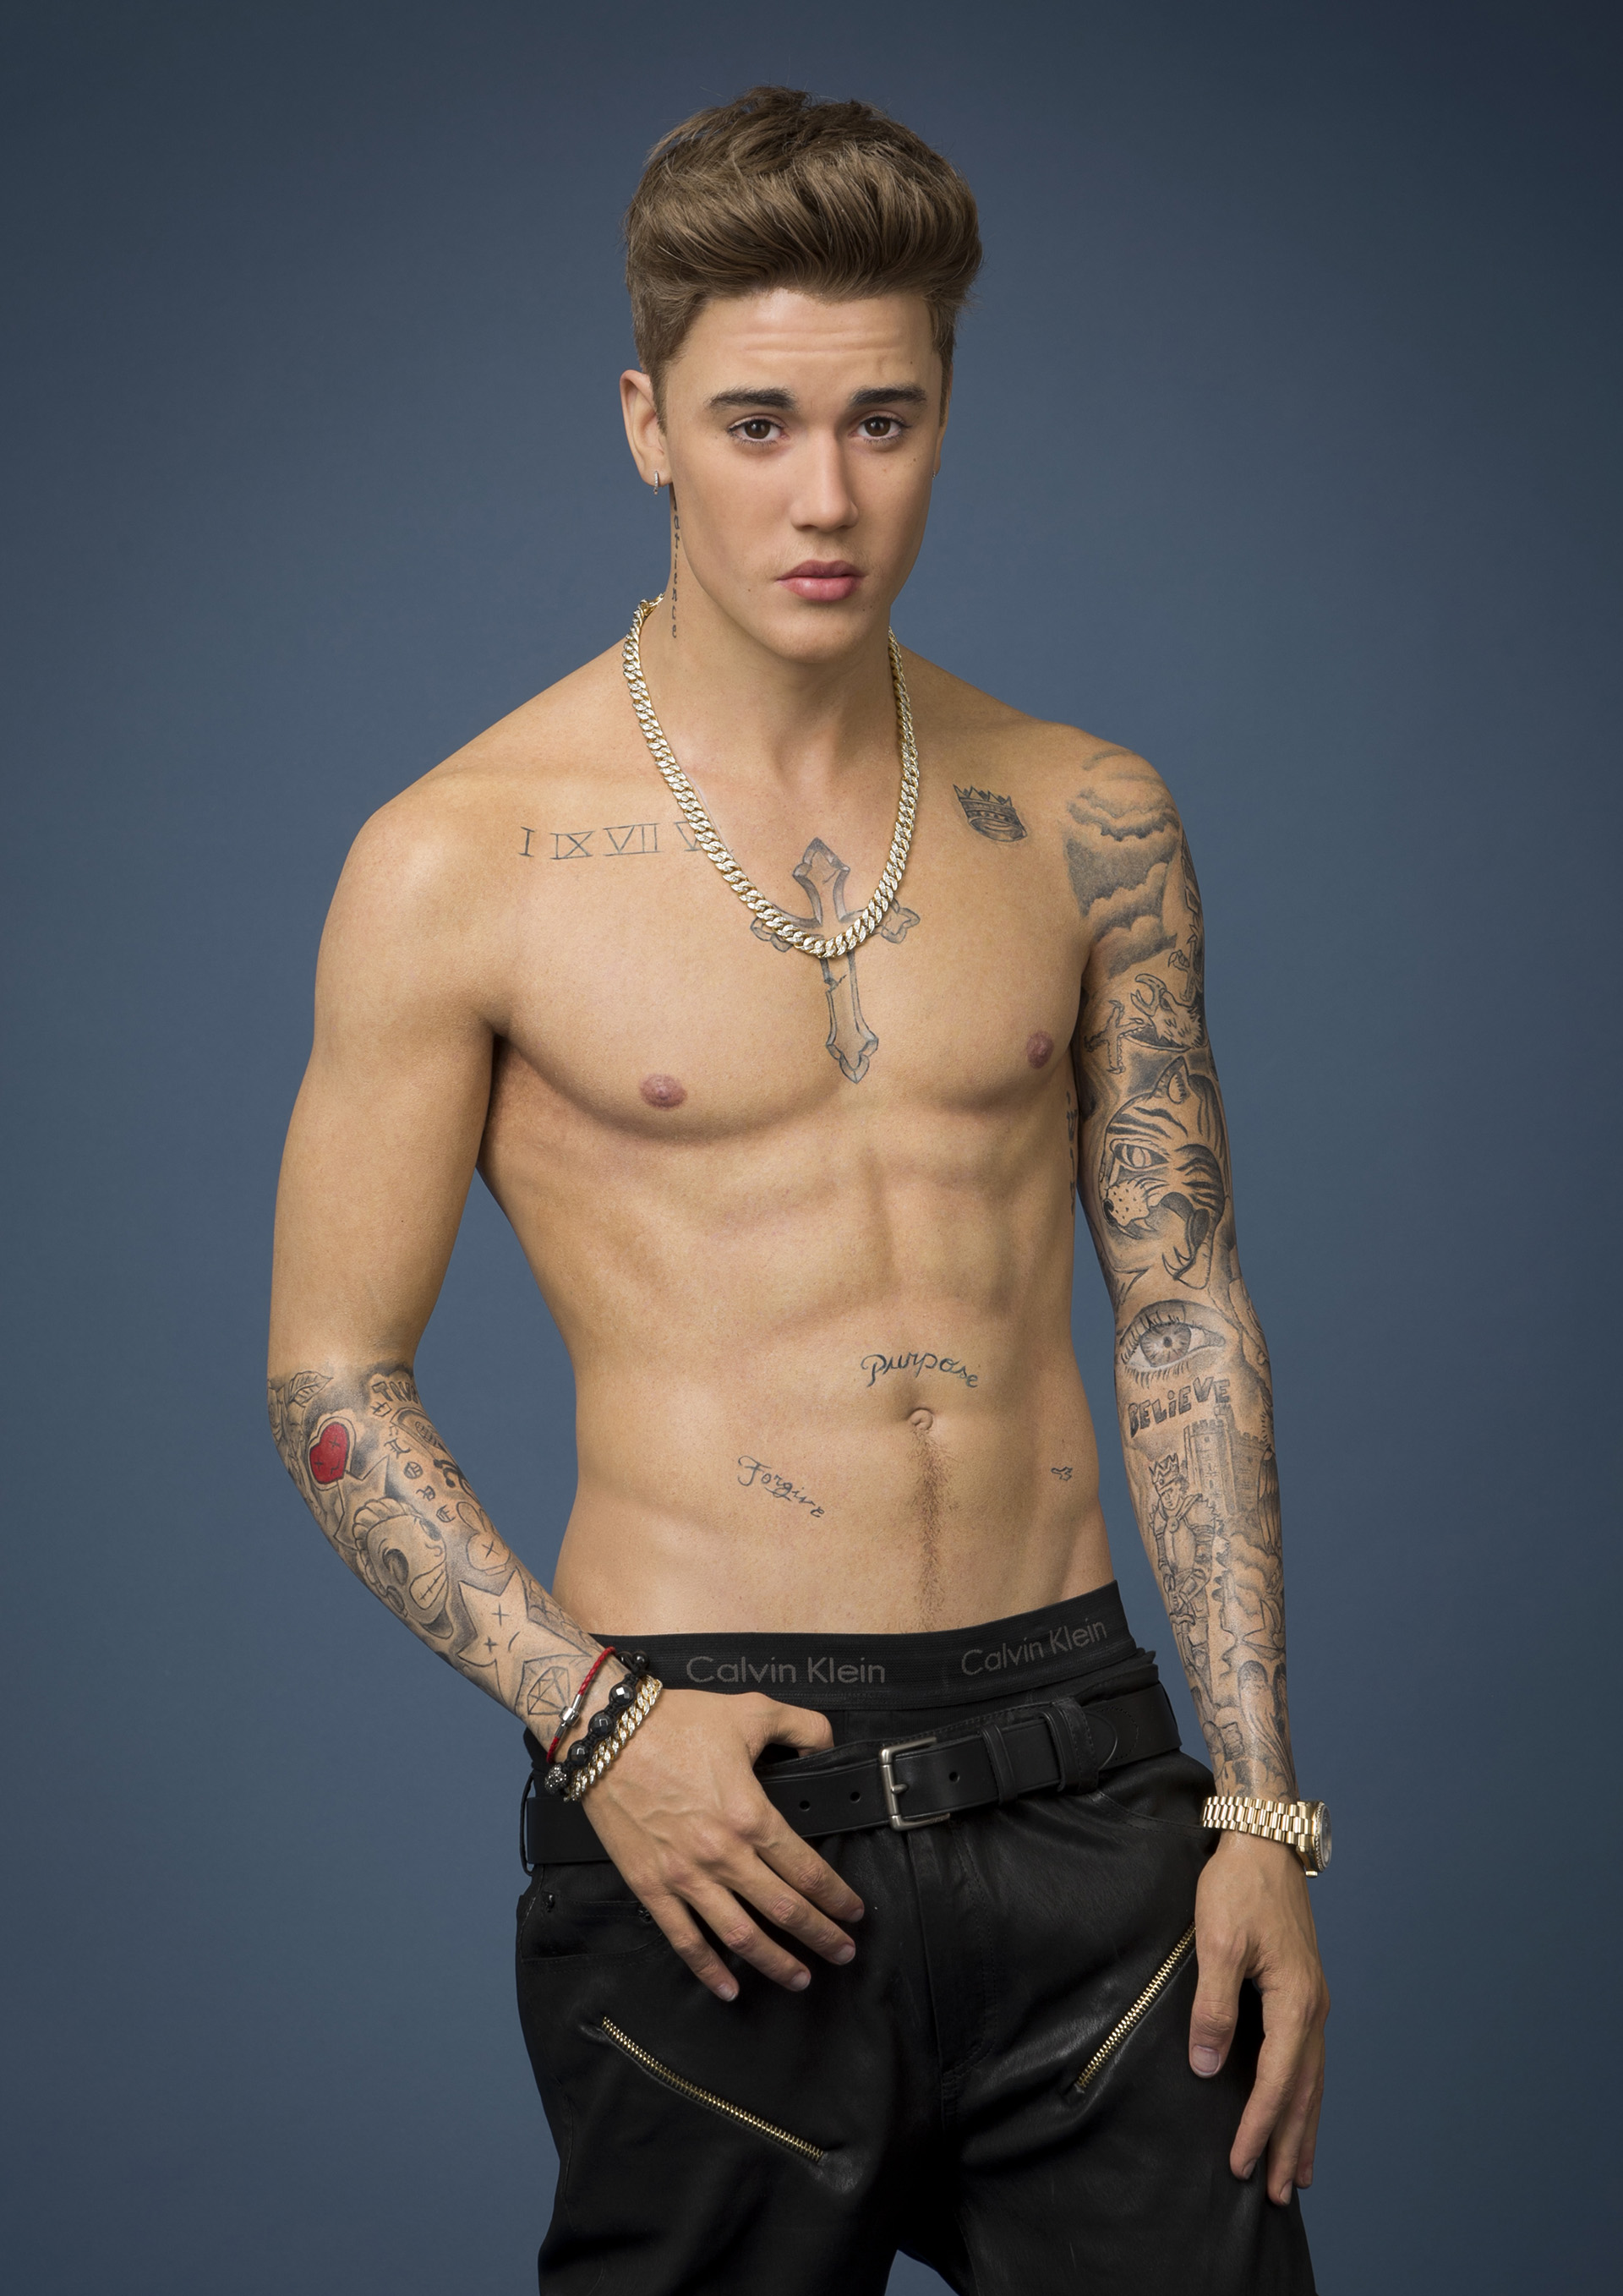 Justin Bieber arriving this October  Madame Tussauds London